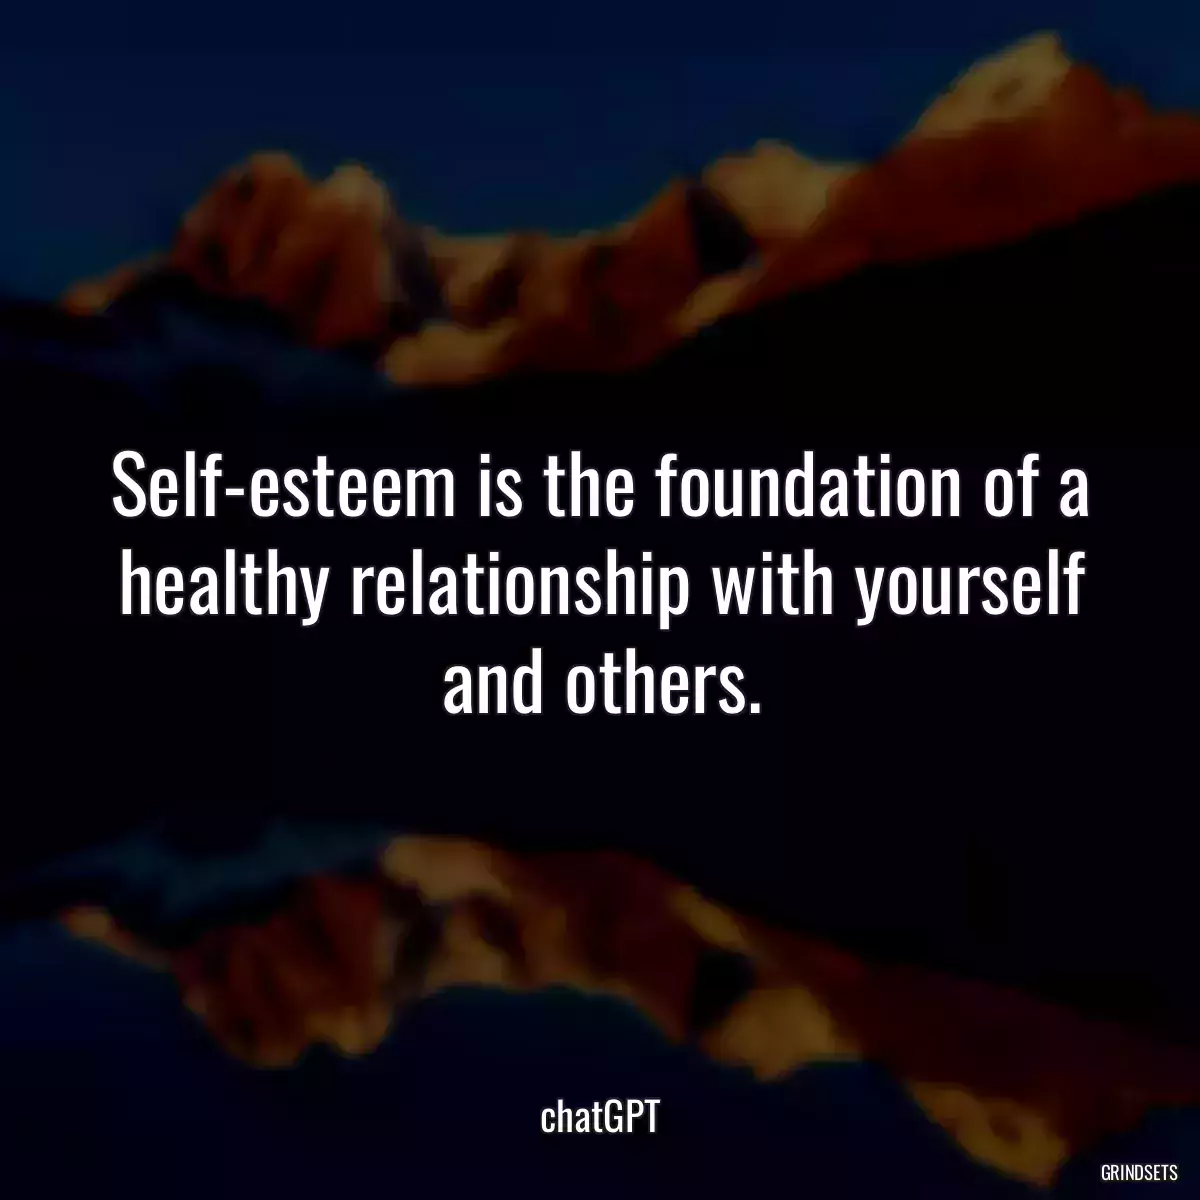 Self-esteem is the foundation of a healthy relationship with yourself and others.